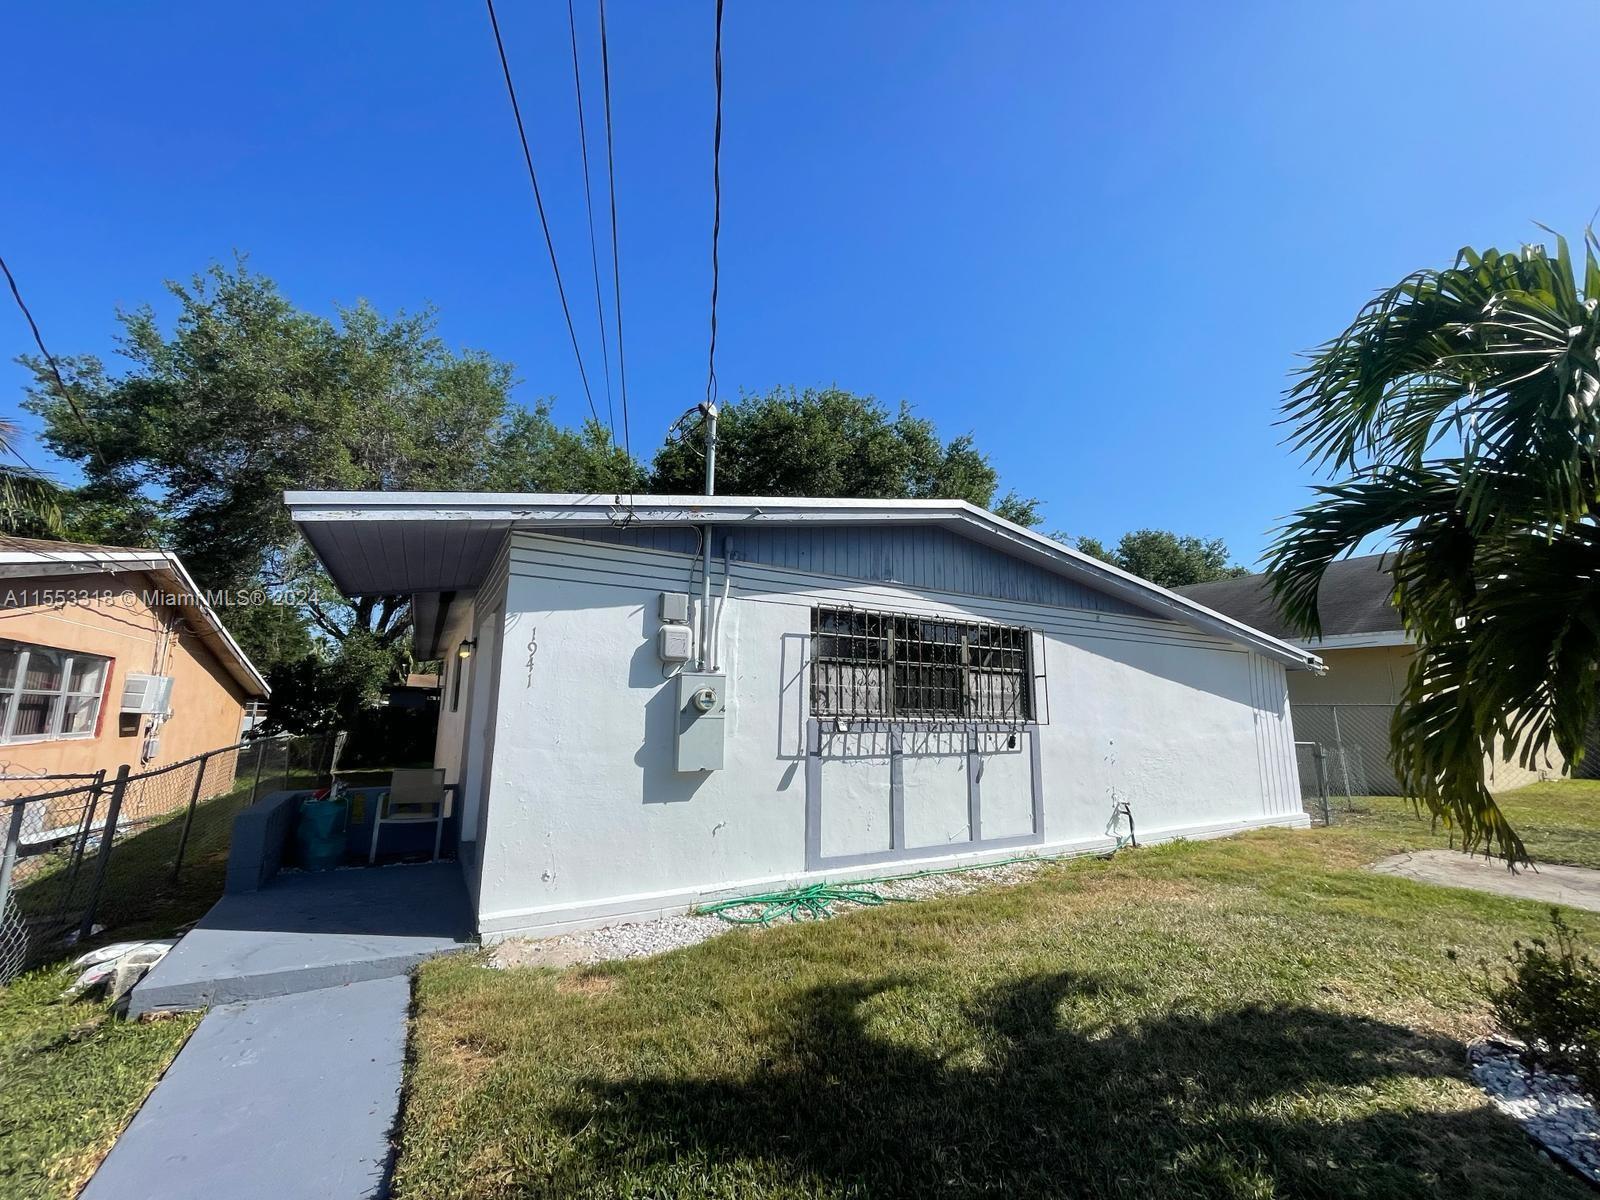 Photo of 1941 NW 152nd Ter in Miami Gardens, FL